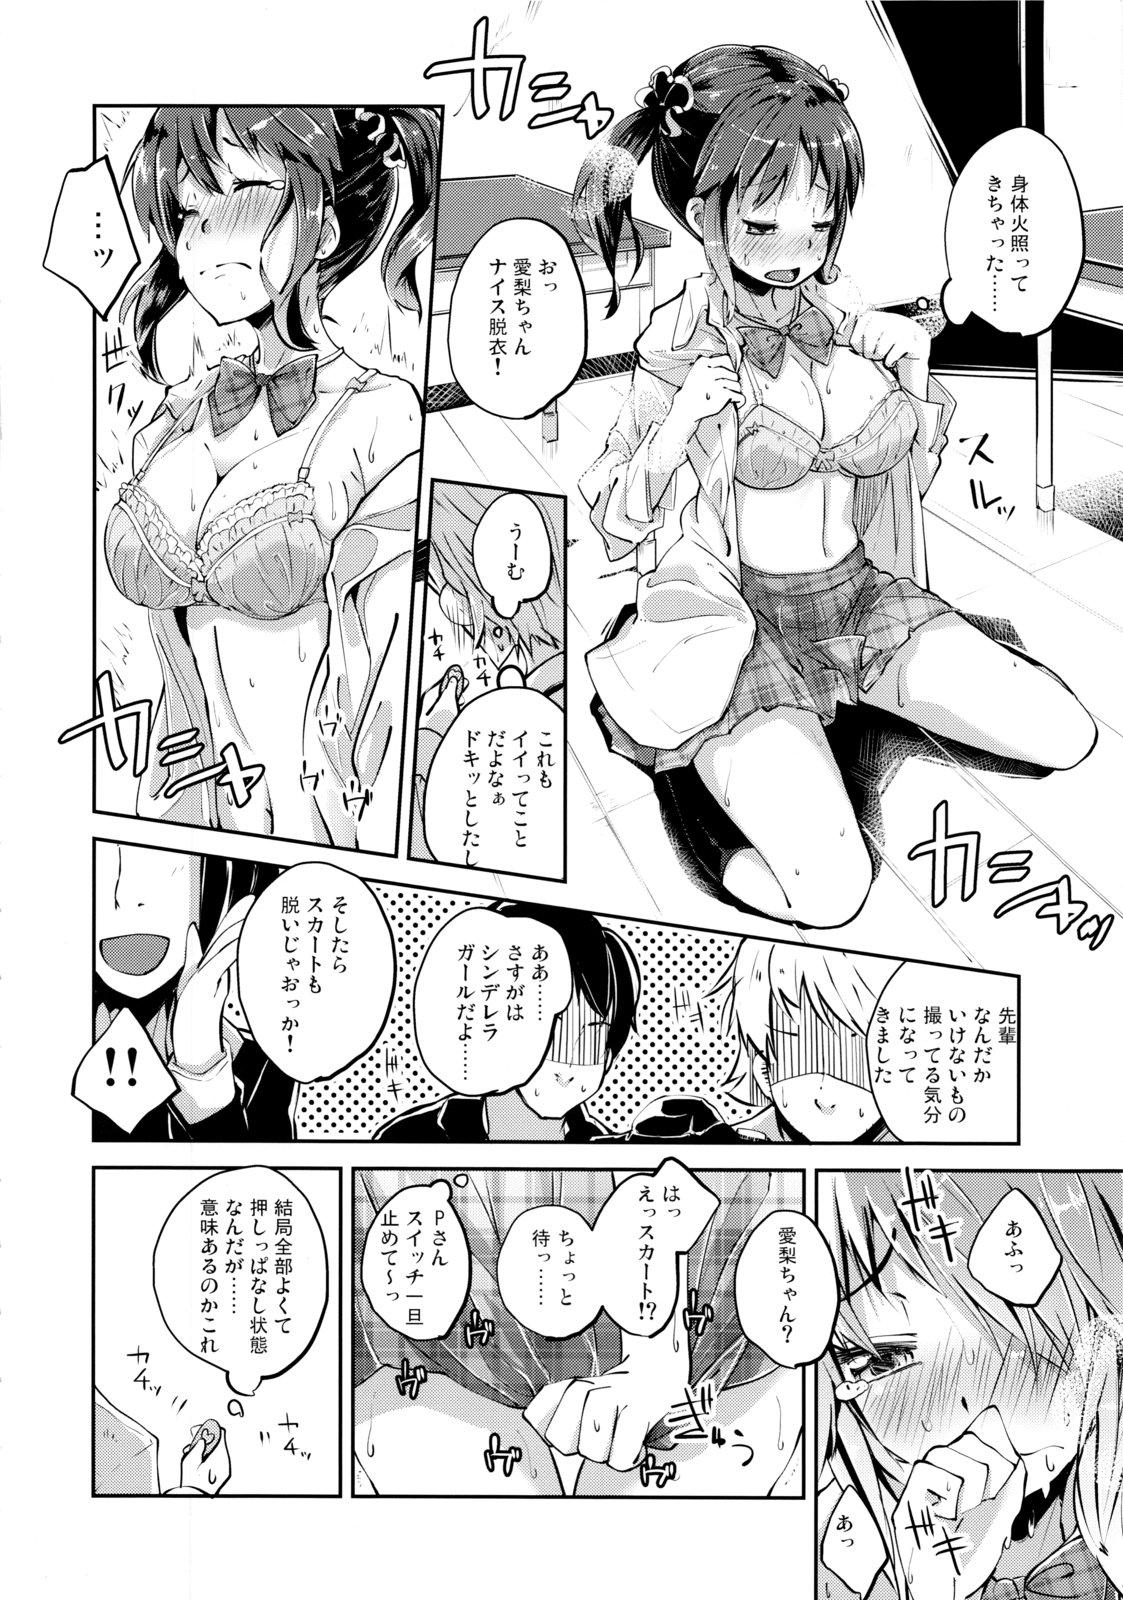 Guy To To Dolce - The idolmaster Roughsex - Page 5